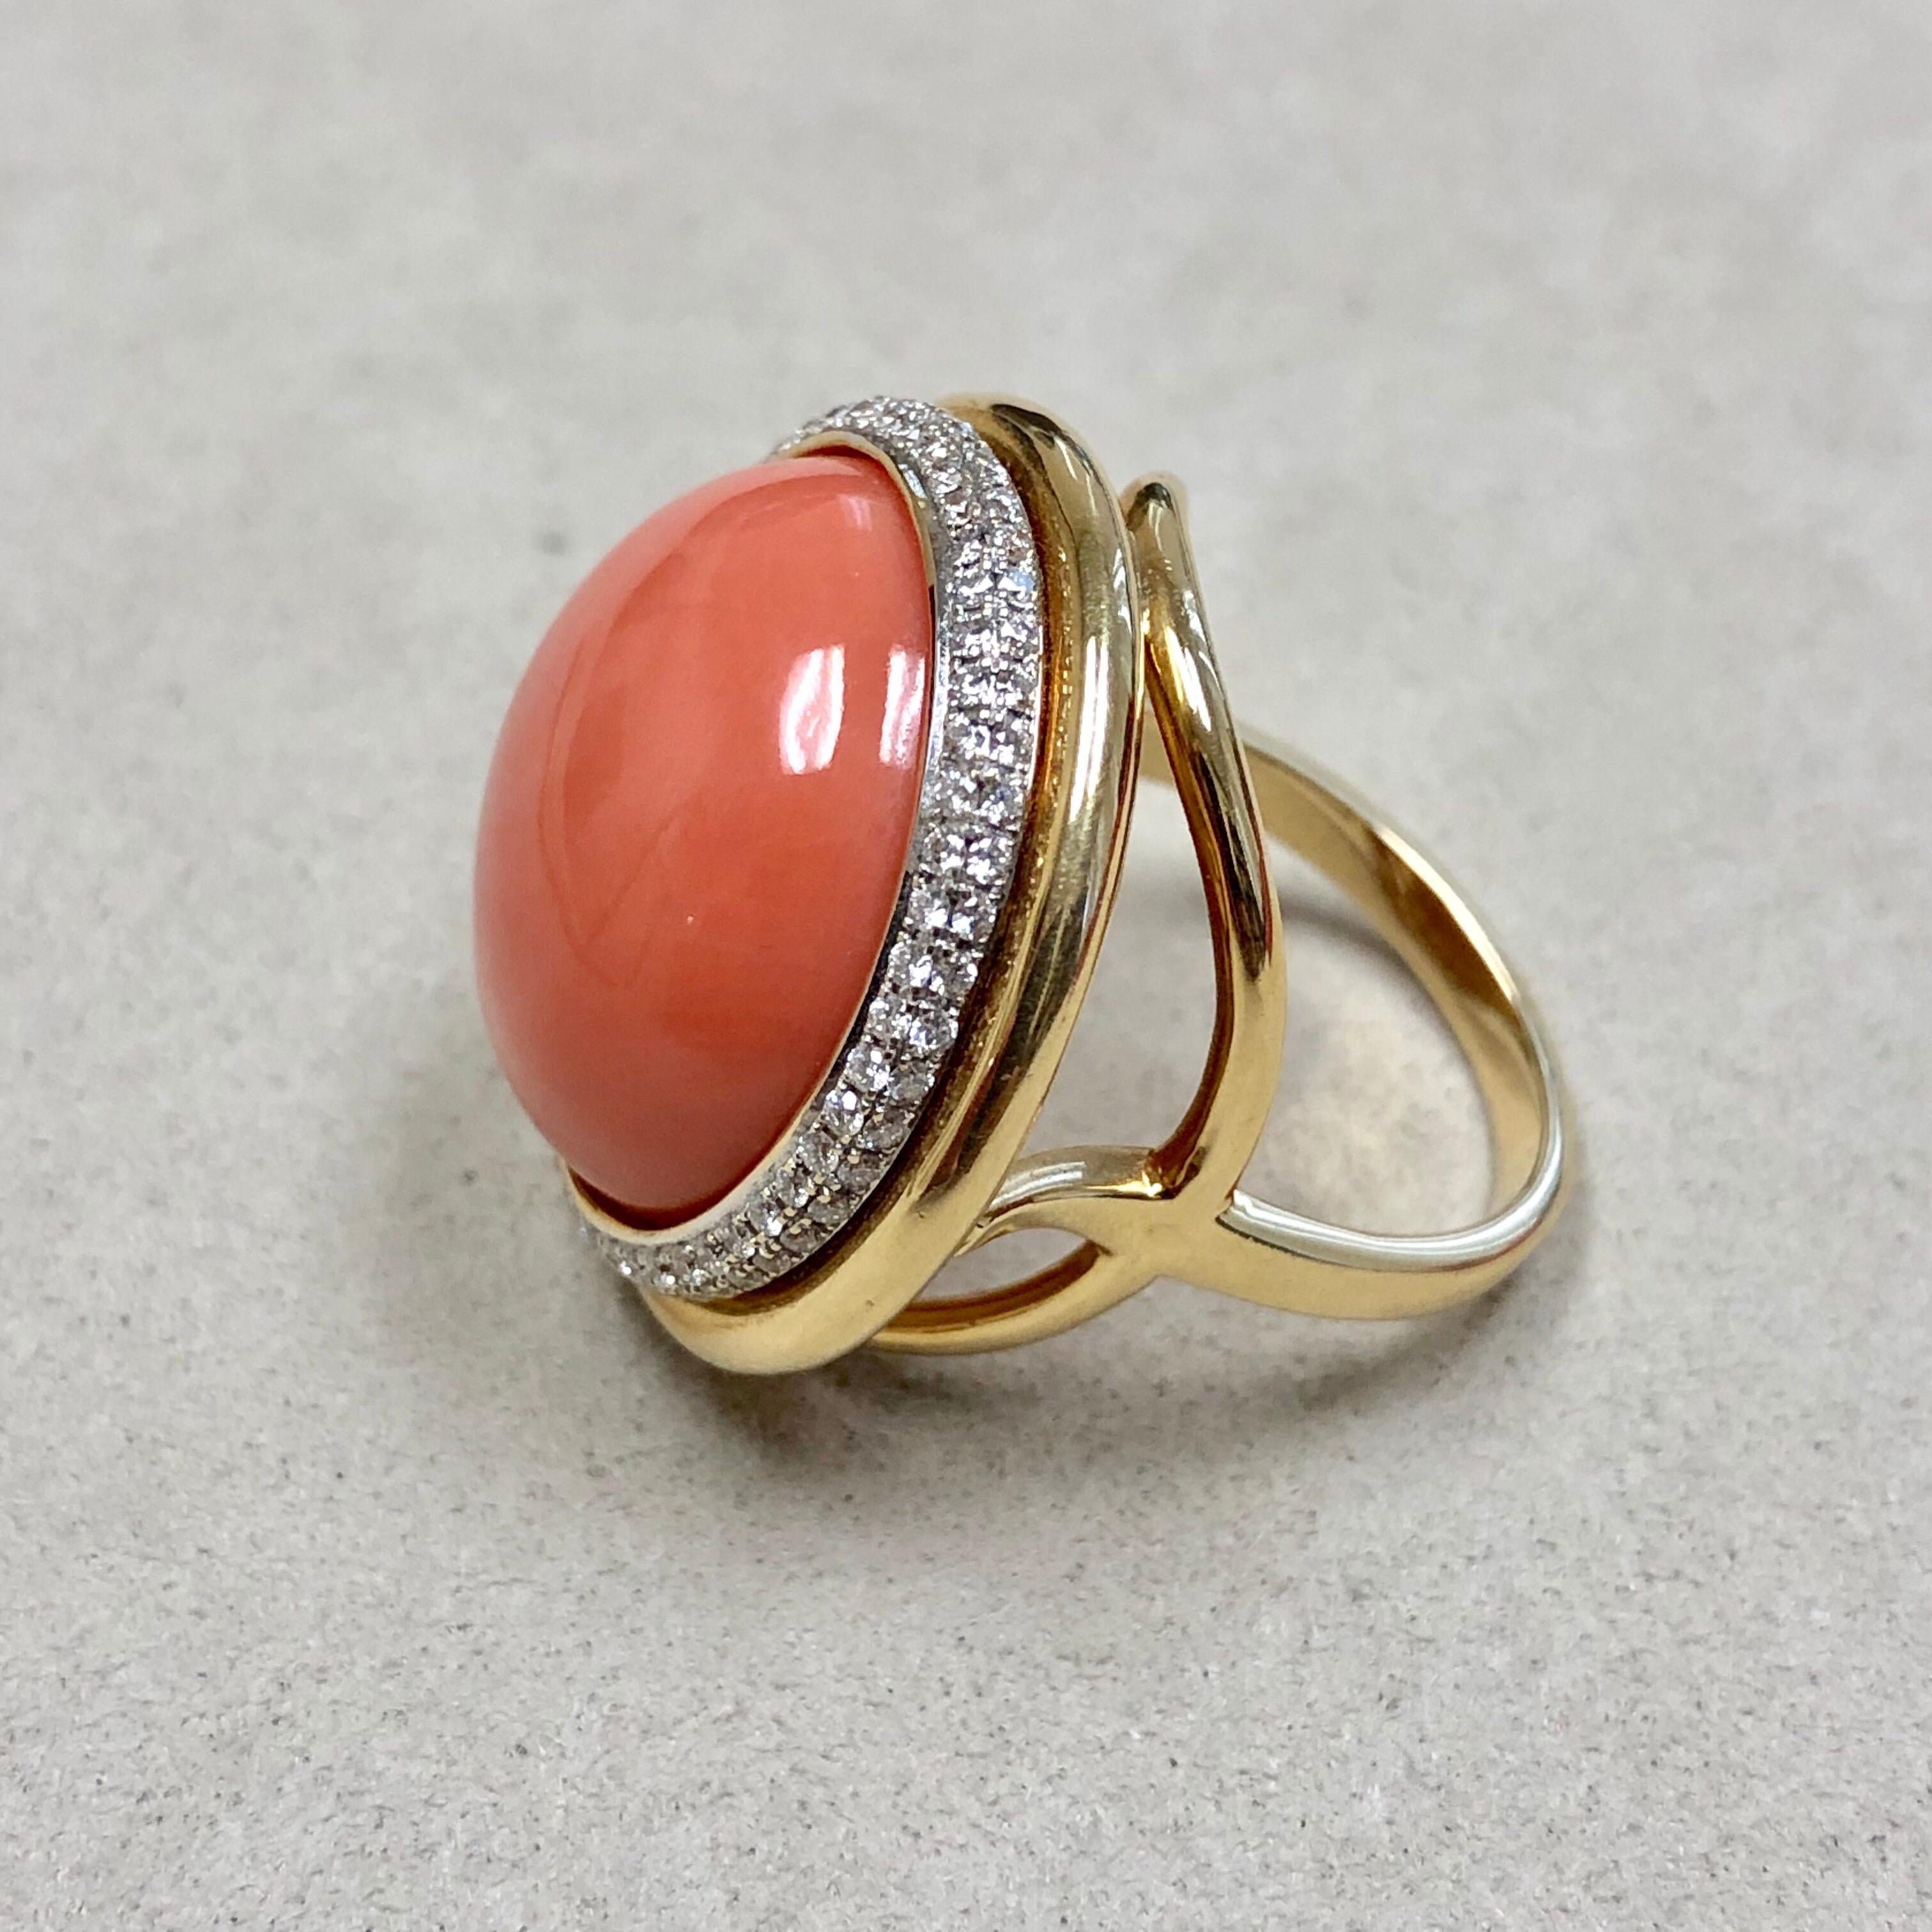 Created in 18 karat yellow gold
Natural Rare Salmon Coral 20 cts approx
Diamonds 0.55 ct approx
Comfortable saddle within shank for easy fit
Ring size US 6.5, can be sized
One of a kind

Exquisitely crafted from 18 karat yellow gold, this singular